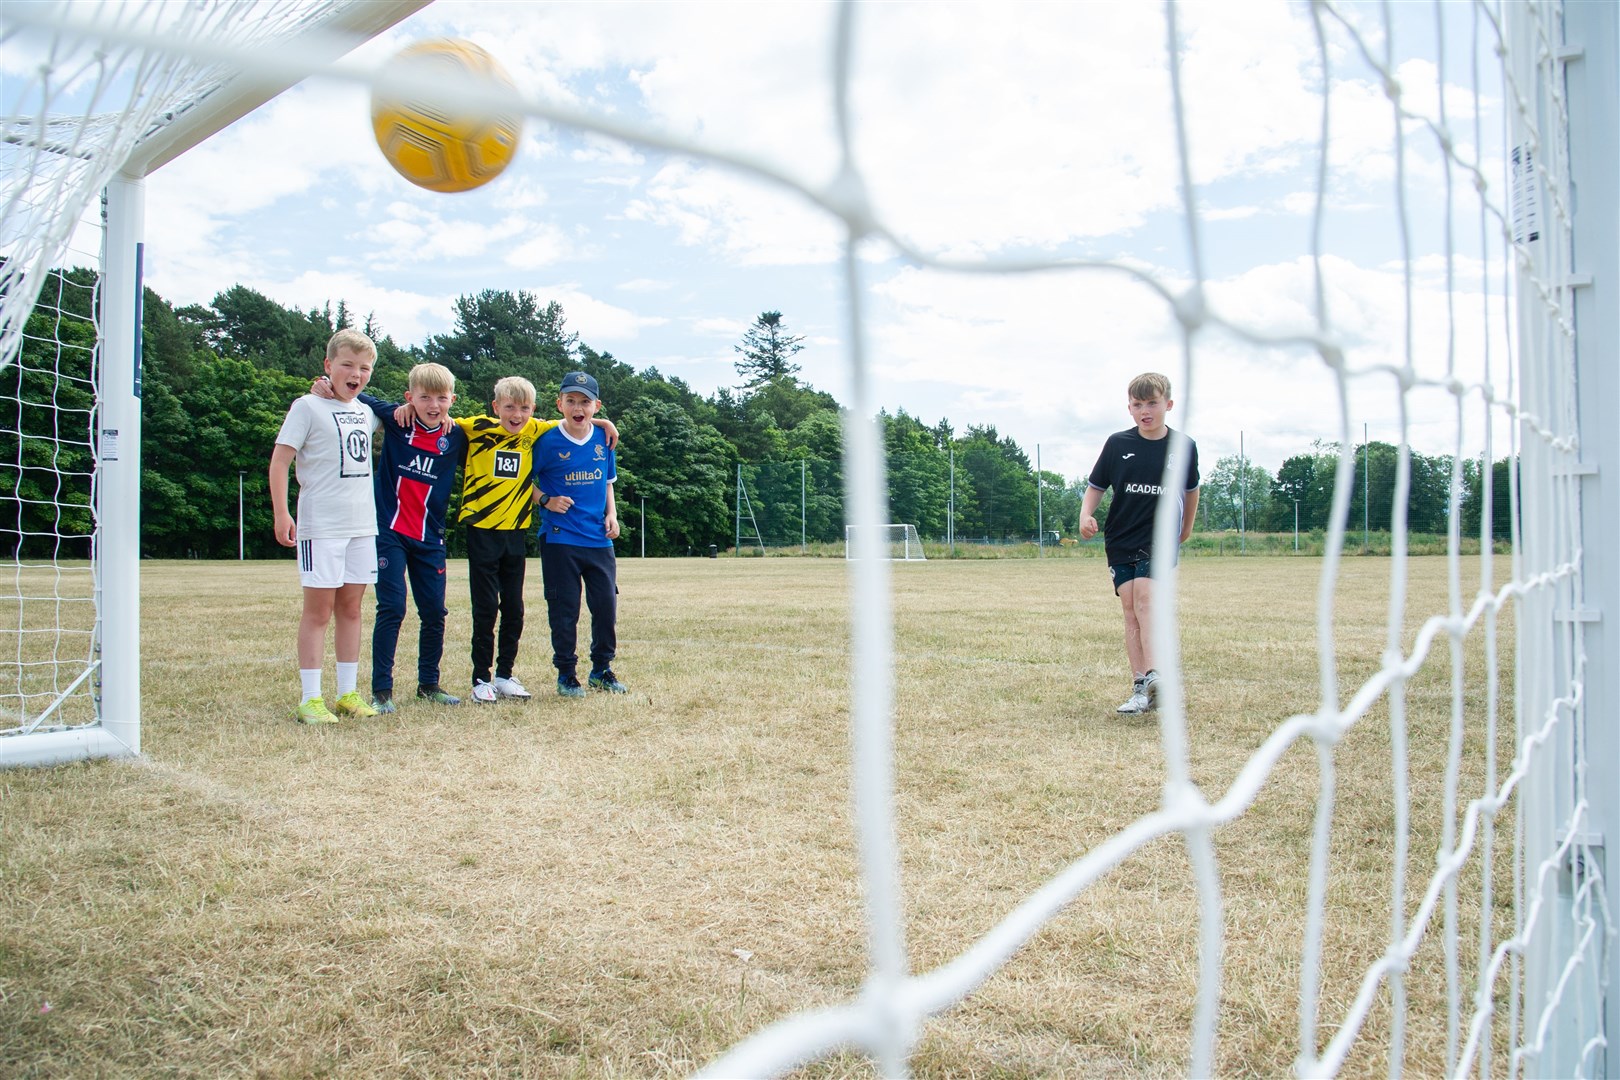 Jayden Stephen takes a shot at goal watched on by Mackie Stewart, Mitchell Grant, Louie Buchan and Tyler McCabe...New football goals have been put up at Thornhill Playing Field in New Elgin after a fundraising campaign raised Â£4,000 for the cause. ..Picture: Daniel Forsyth..